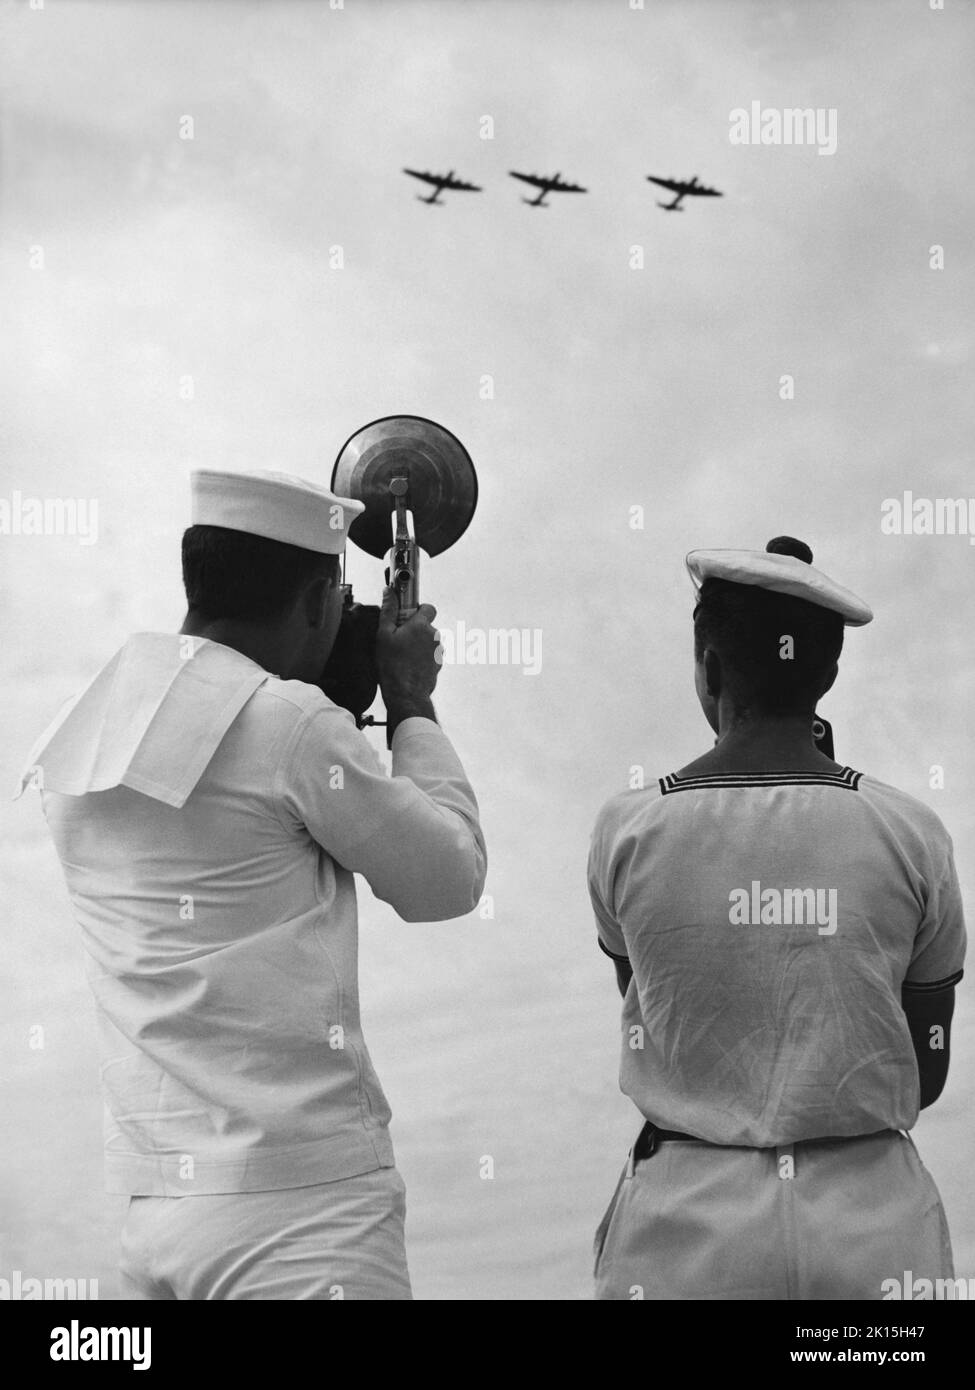 October 16th, 1952 image of members of the American and French Navies photographing planes at Port Lyautey, (Kenitra), Morocco. Stock Photo